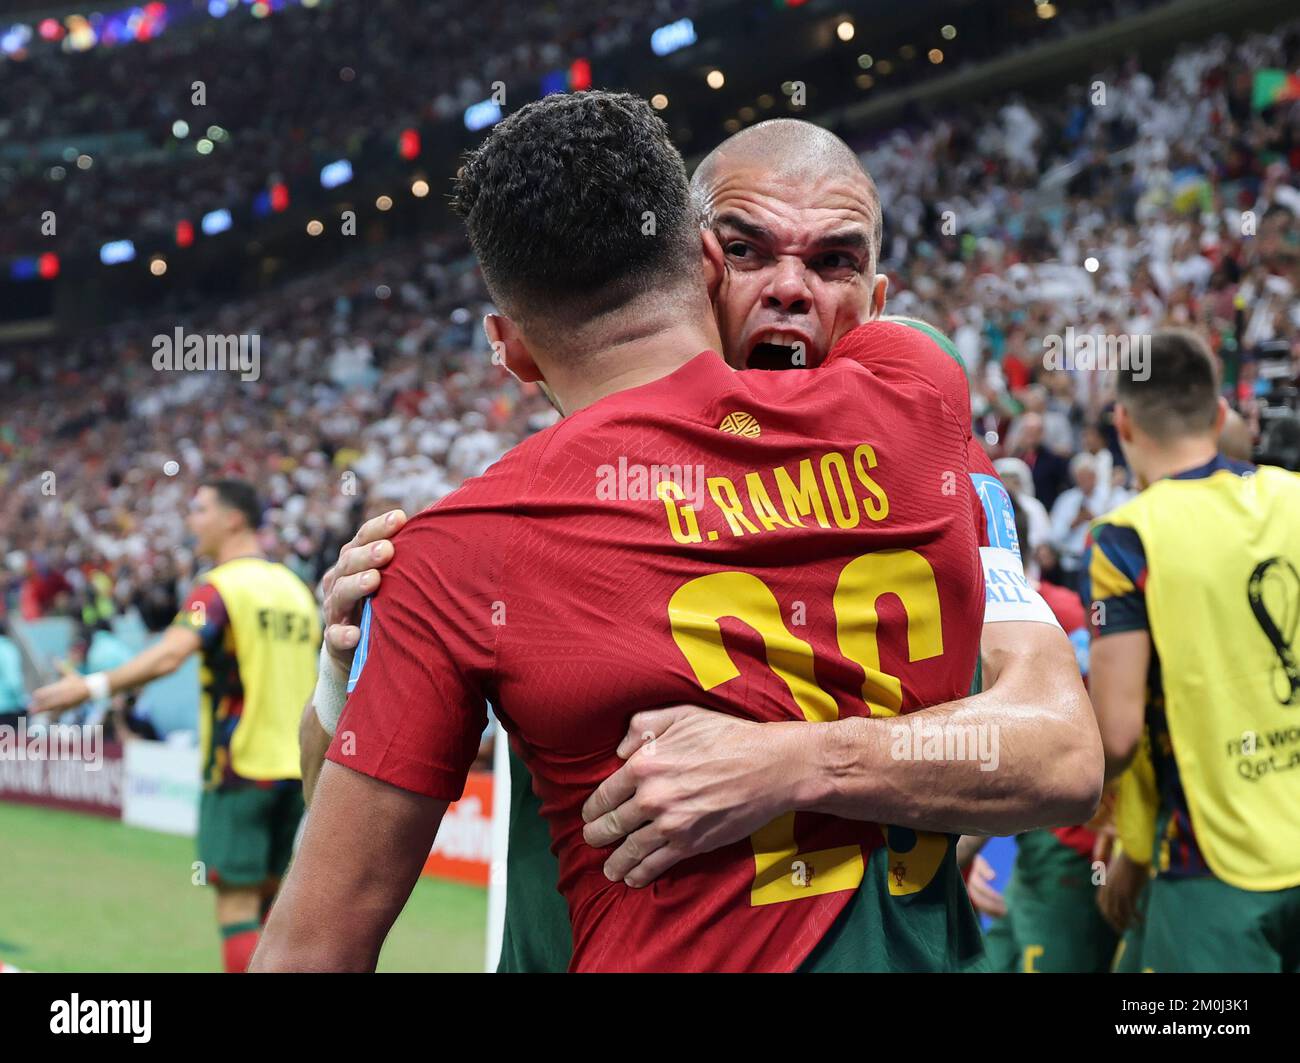 Lusail, Qatar. 6th Dec, 2022. Goncalo Ramos (L) of Portugal celebrates his goal with teammate Pepe during the Round of 16 match between Portugal and Switzerland of the 2022 FIFA World Cup at Lusail Stadium in Lusail, Qatar, Dec. 6, 2022. Credit: Cao Can/Xinhua/Alamy Live News Stock Photo